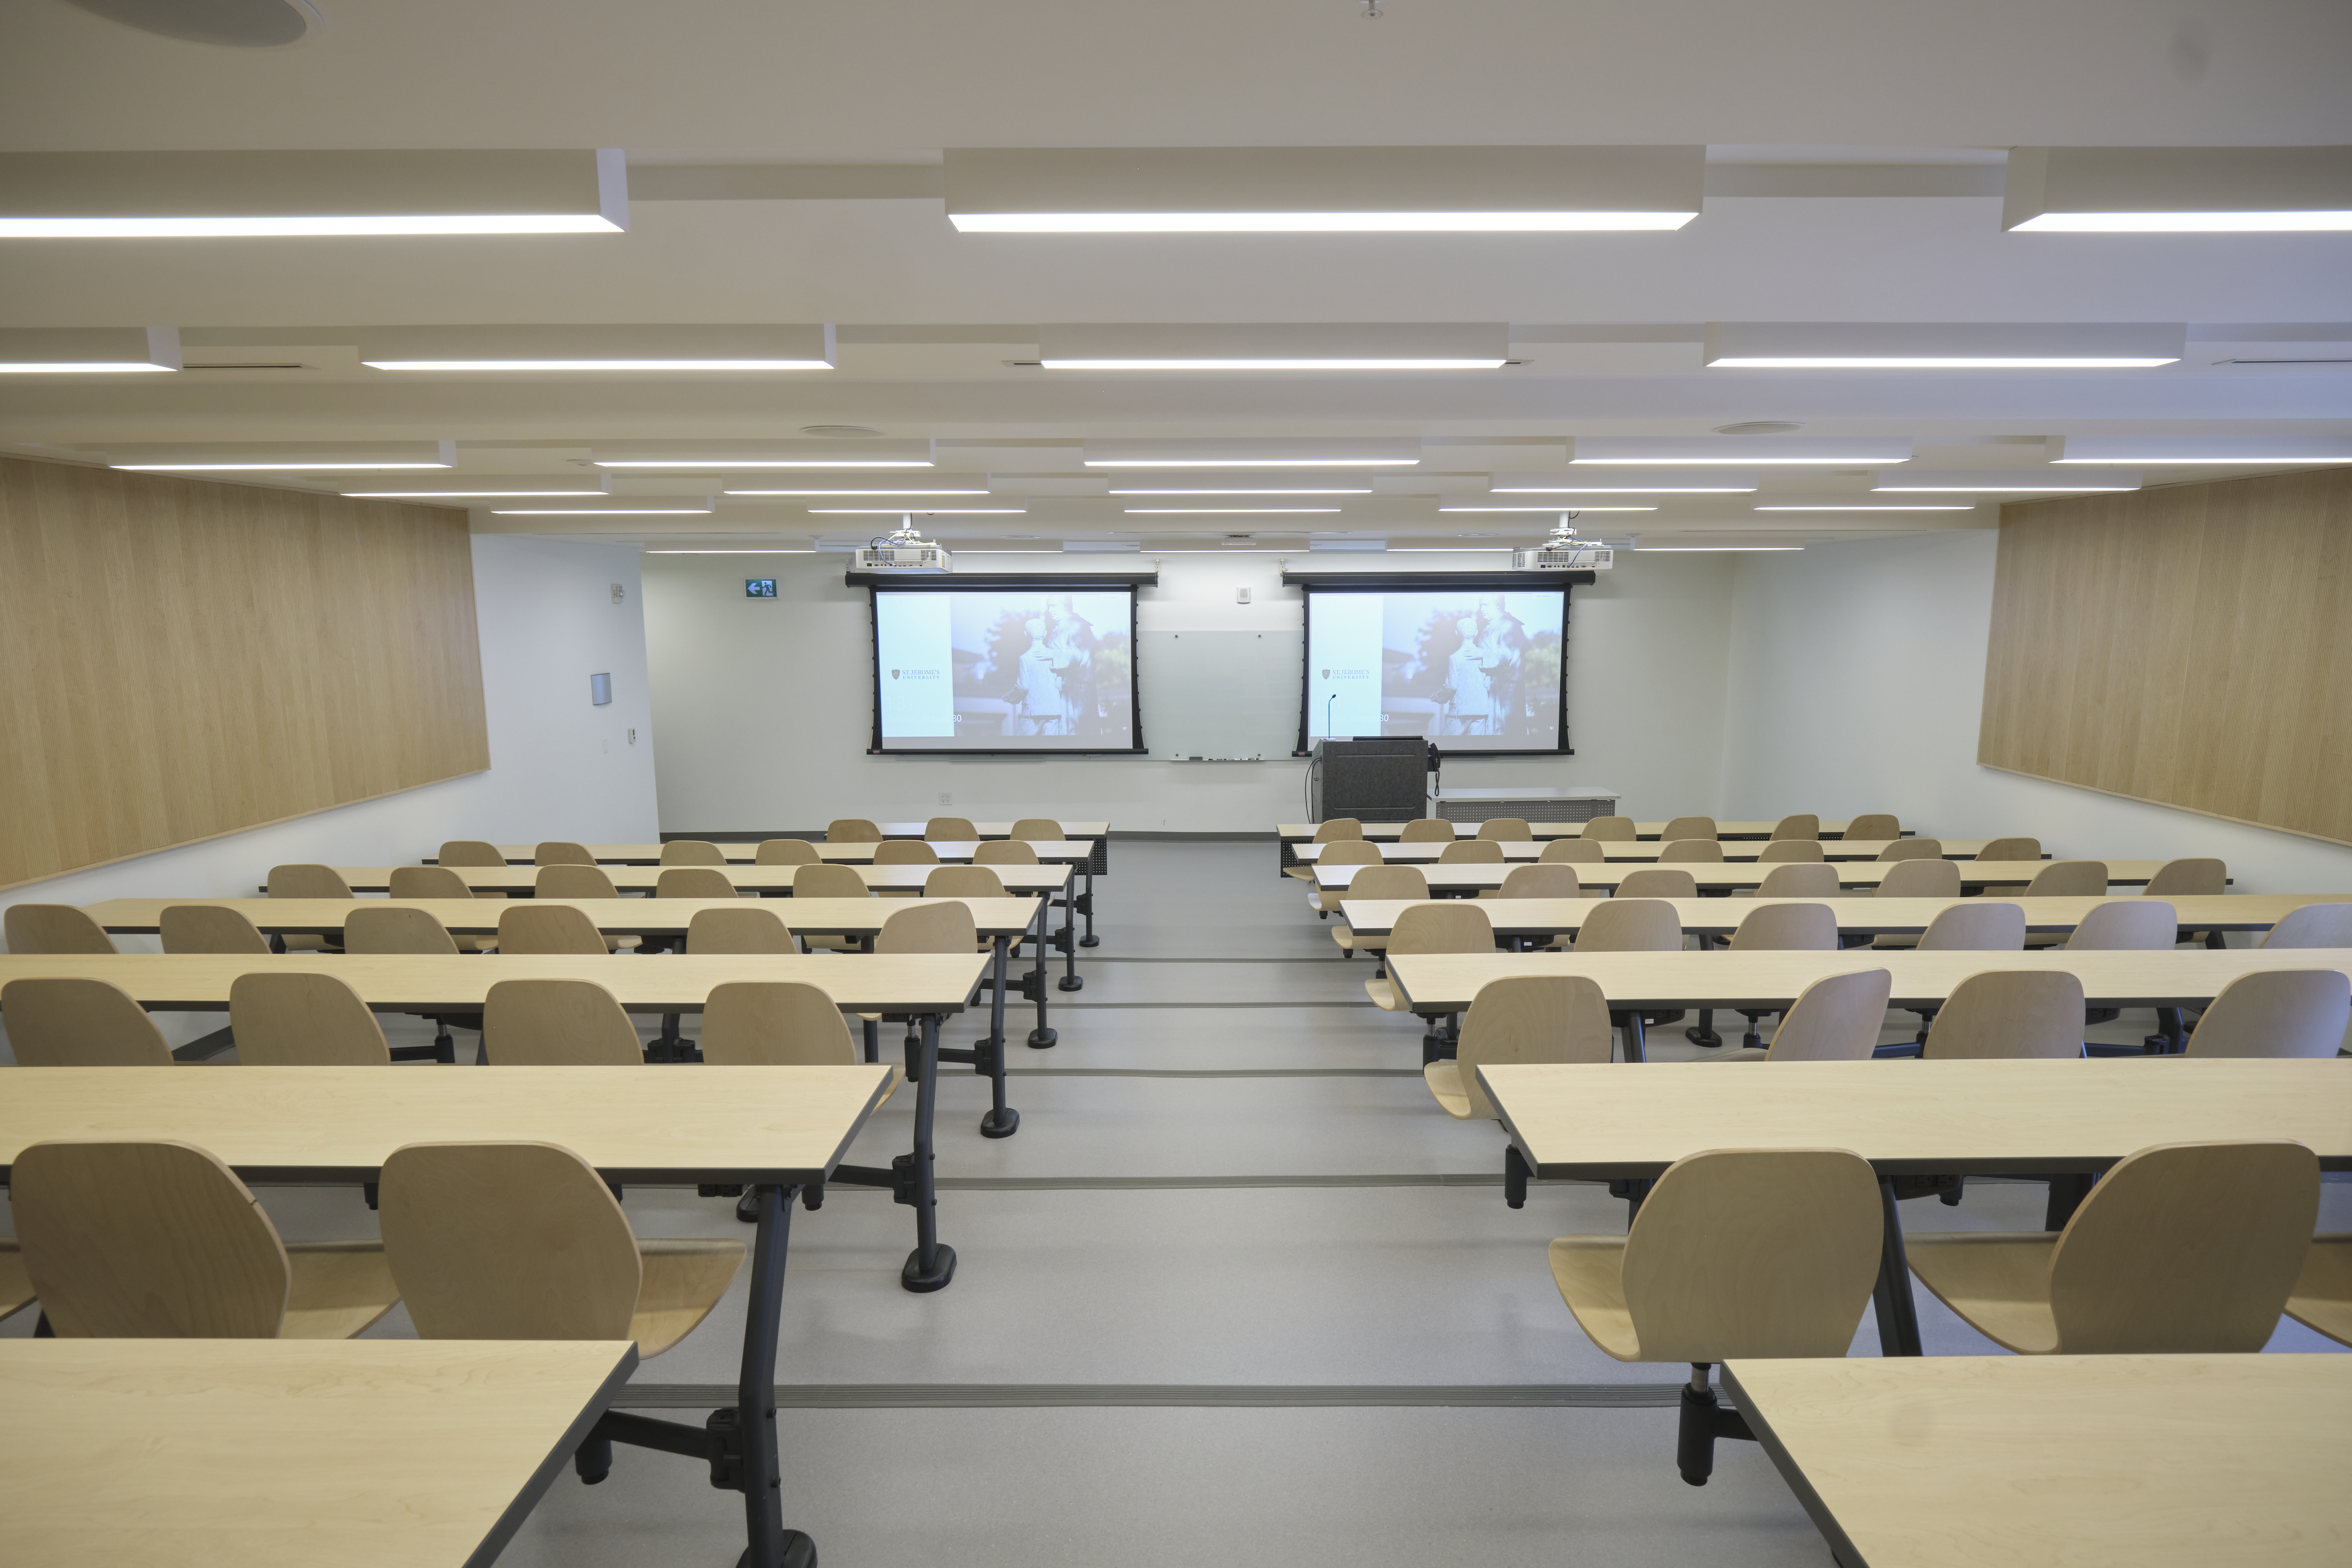 A classroom with fixed tiered seating and a lectern, whiteboards, and projector screens at the front.